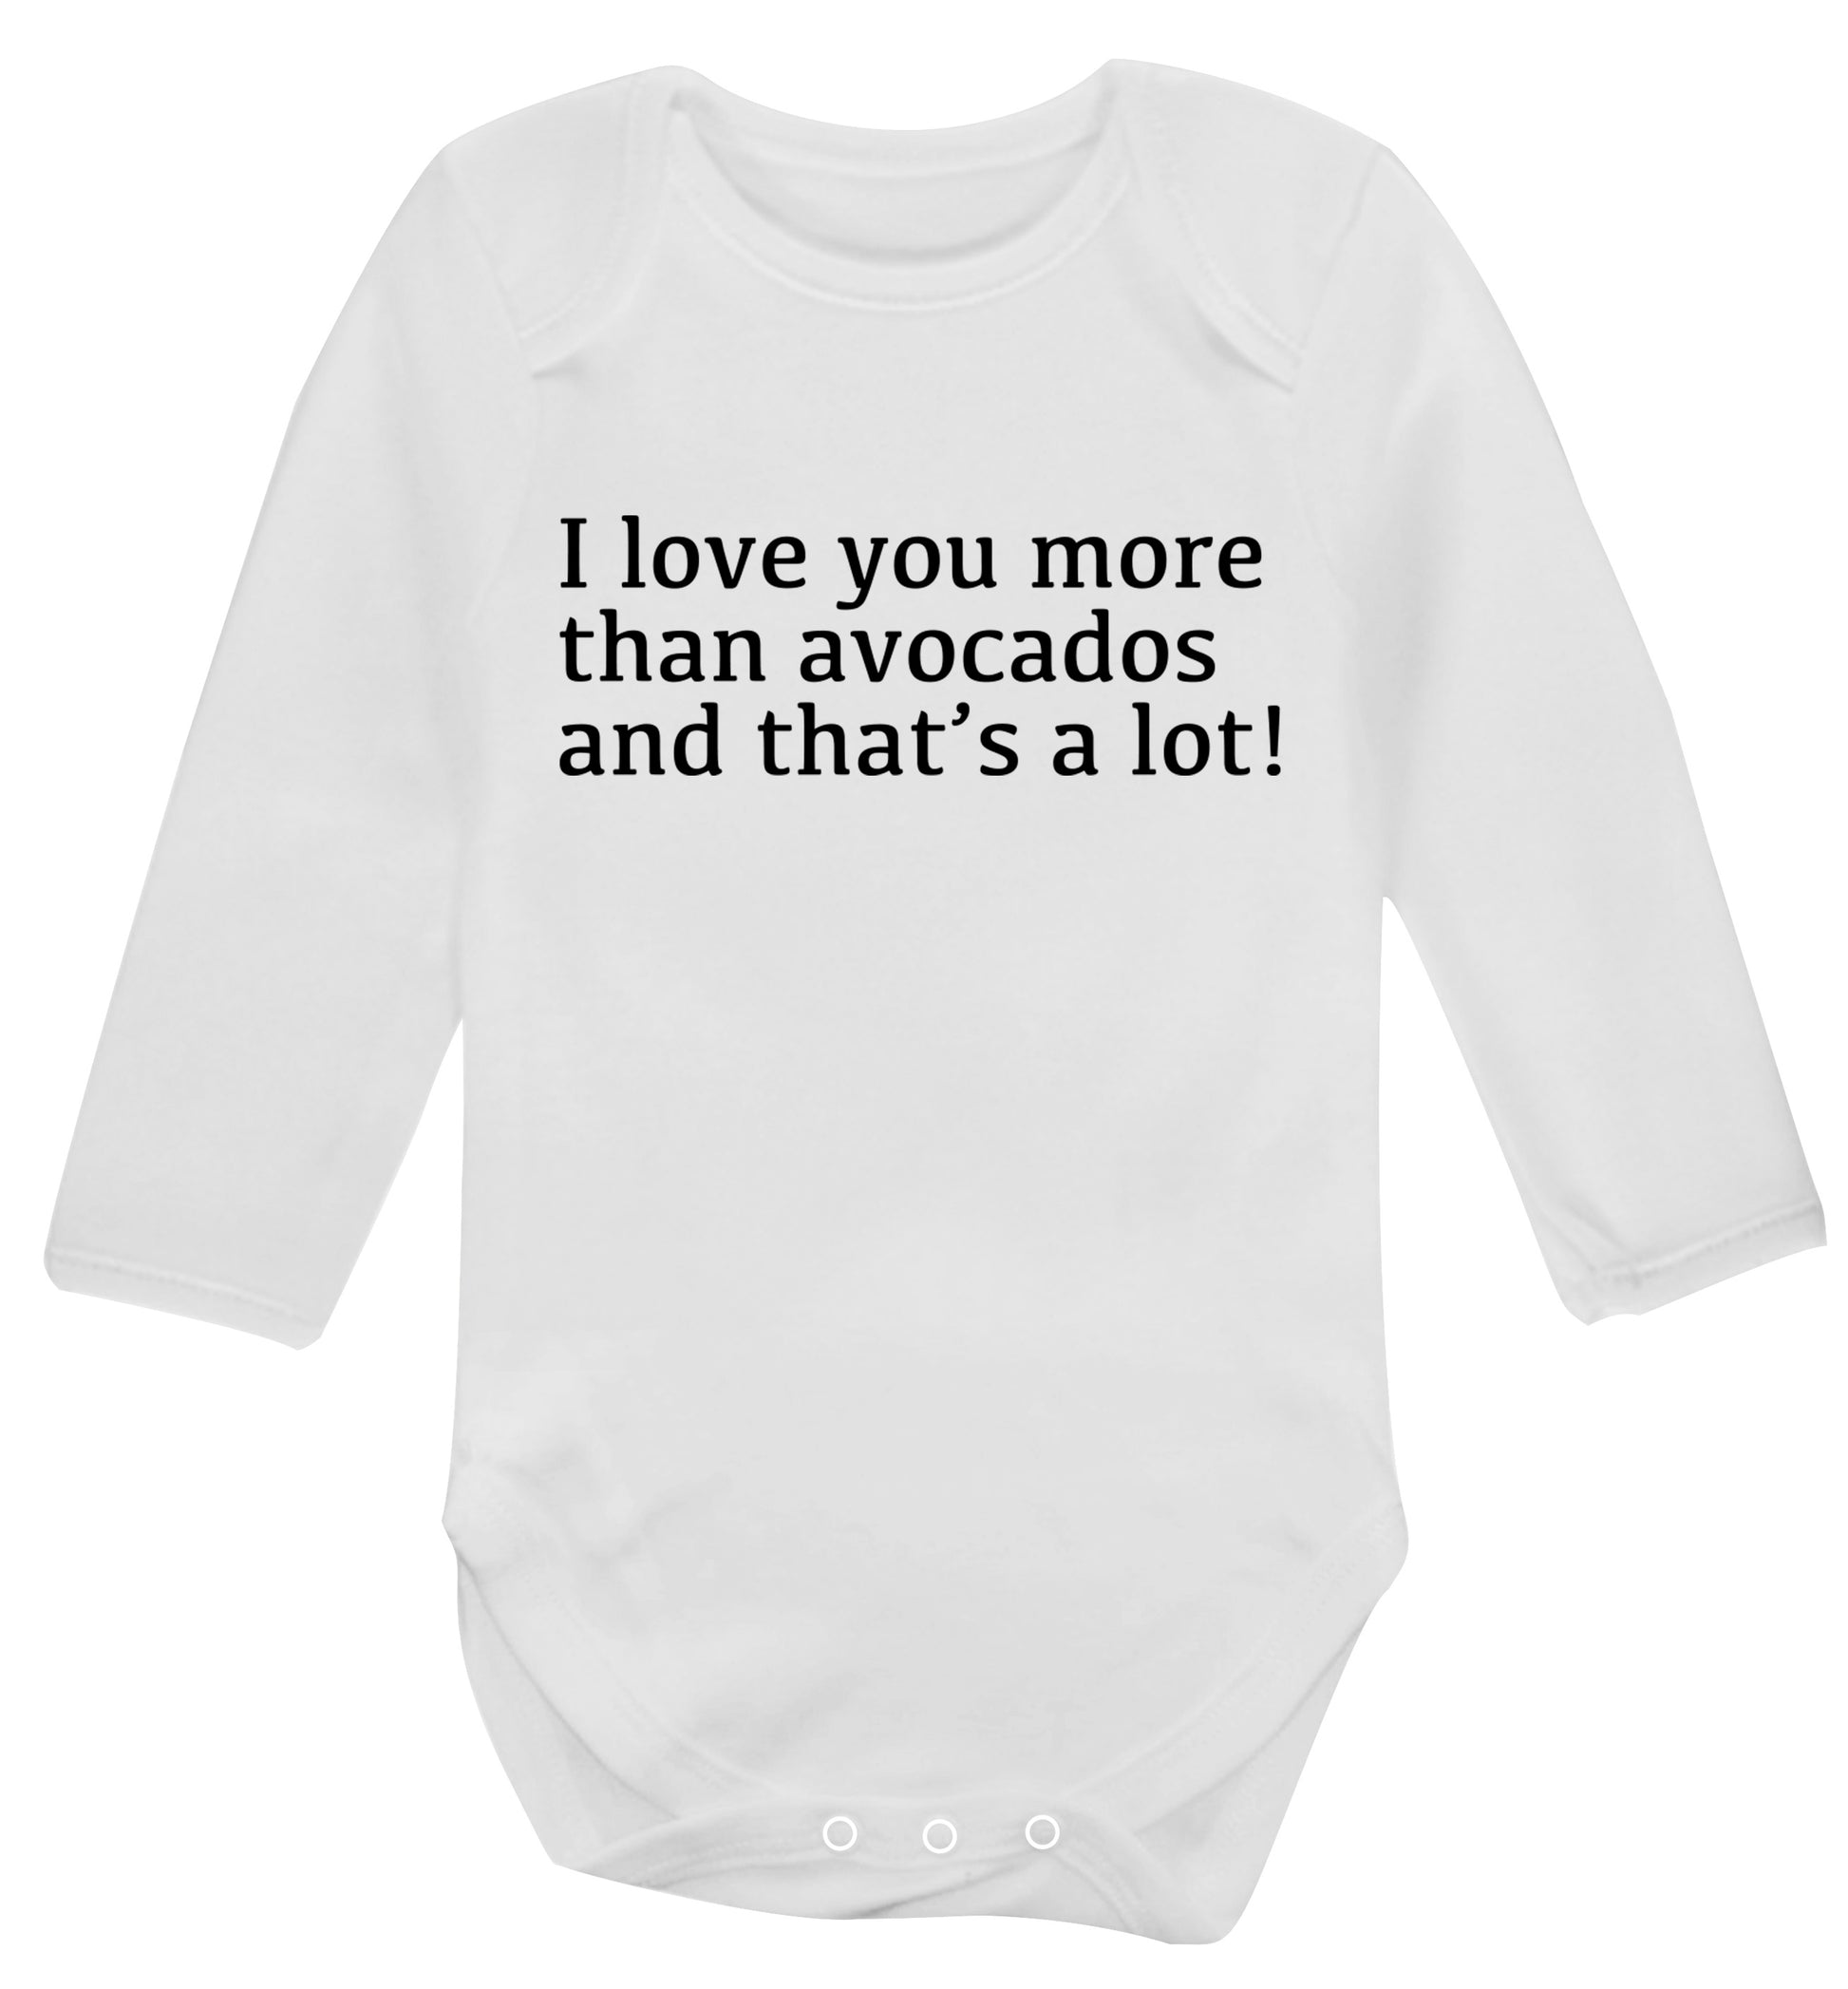 I love you more than avocados and that's a lot Baby Vest long sleeved white 6-12 months